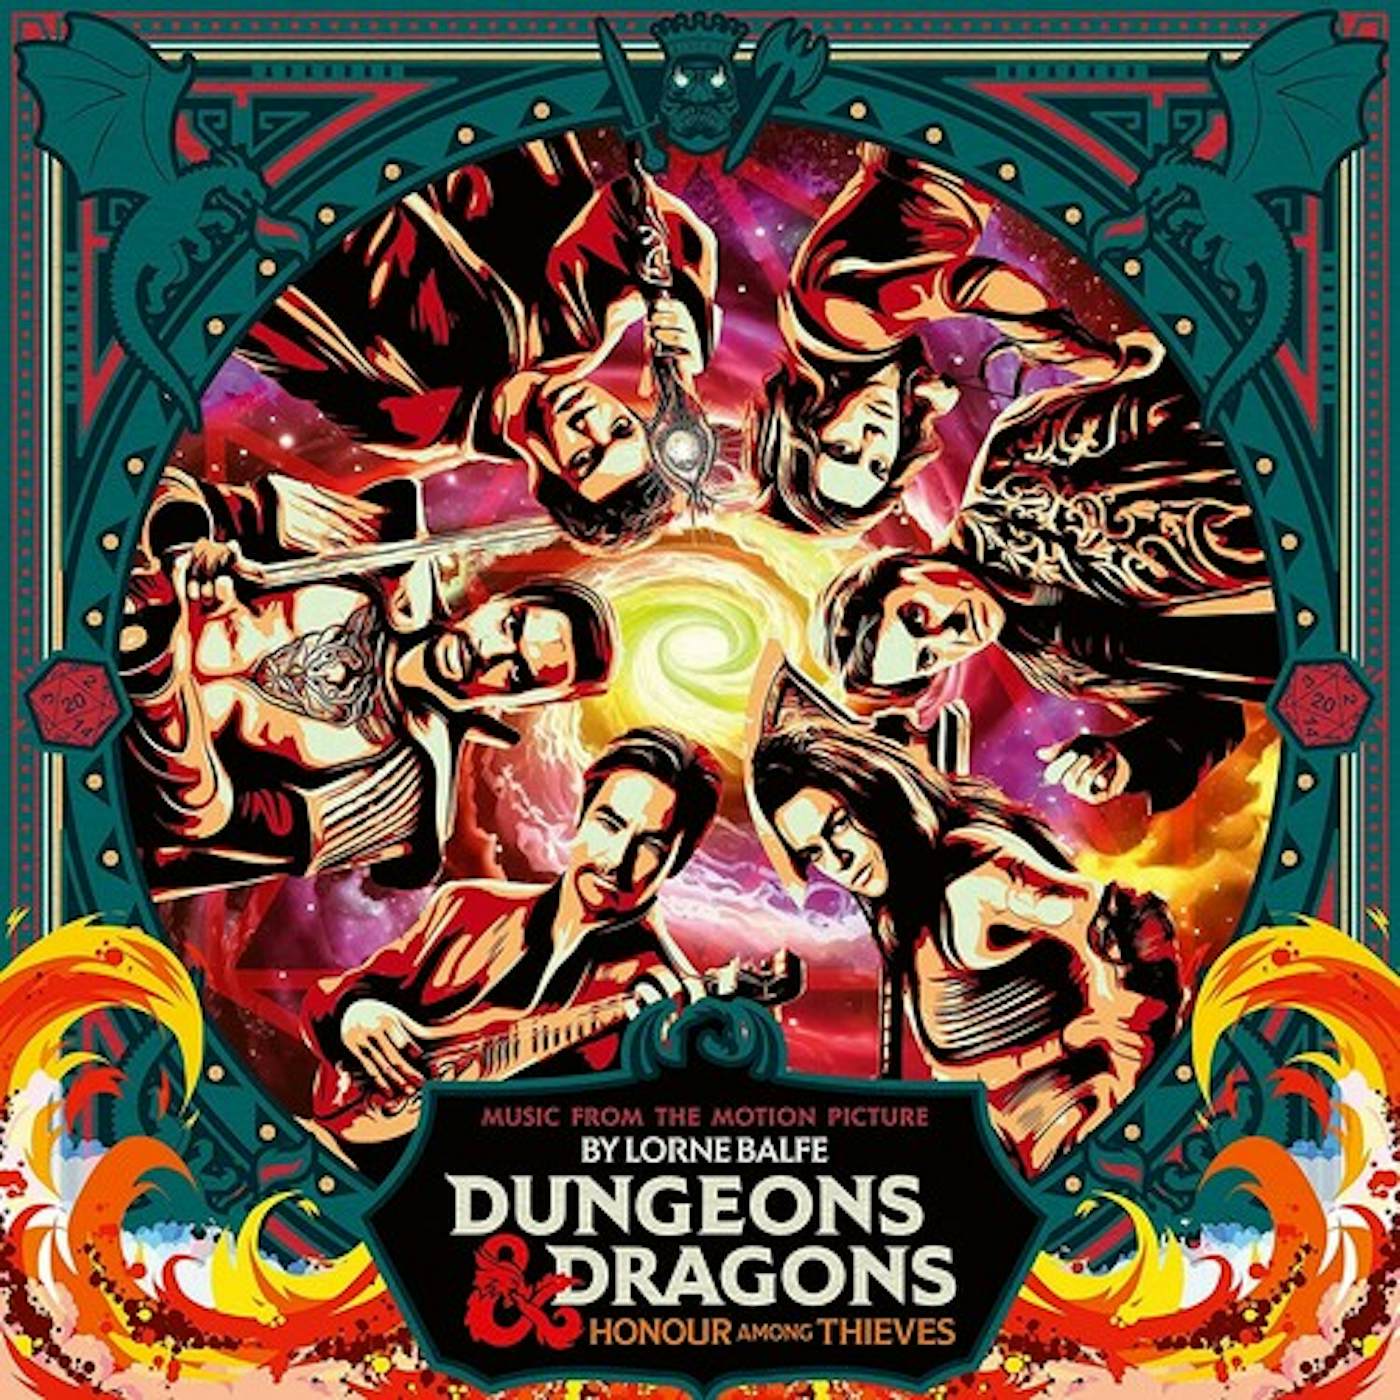 Lorne Balfe DUNGEONS & DRAGONS: HONOR AMONG THIEVES - Original Soundtrack CD